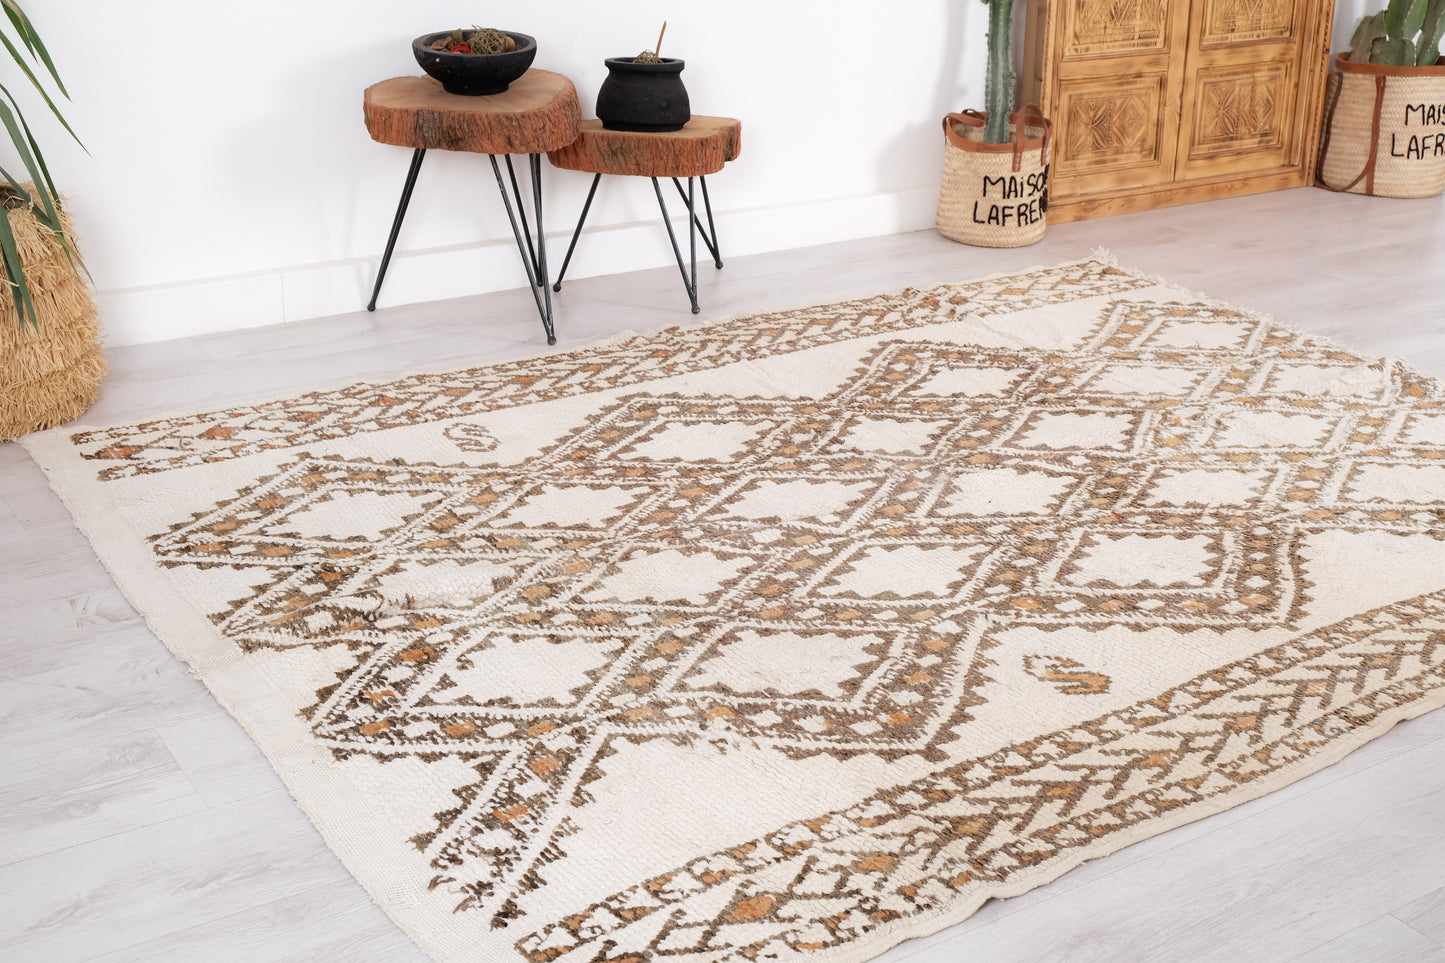 Beni Ourain Rug 6x8 ft – Ref. 1700